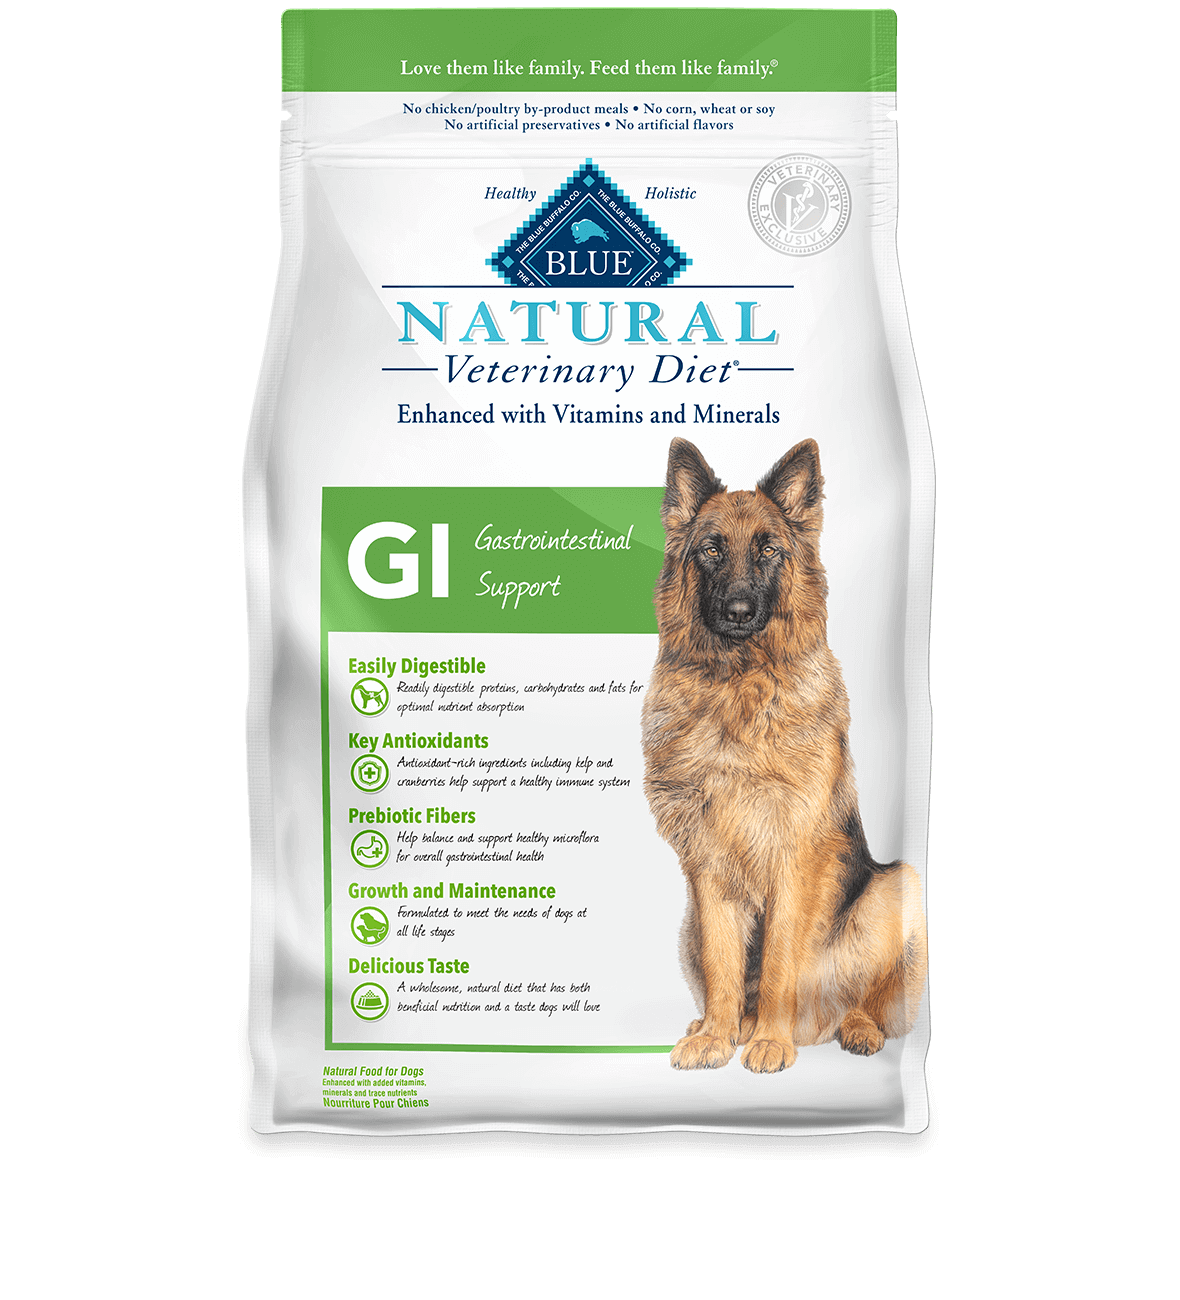 blue natural veterinary diet gi gastrointestinal support dog dry food